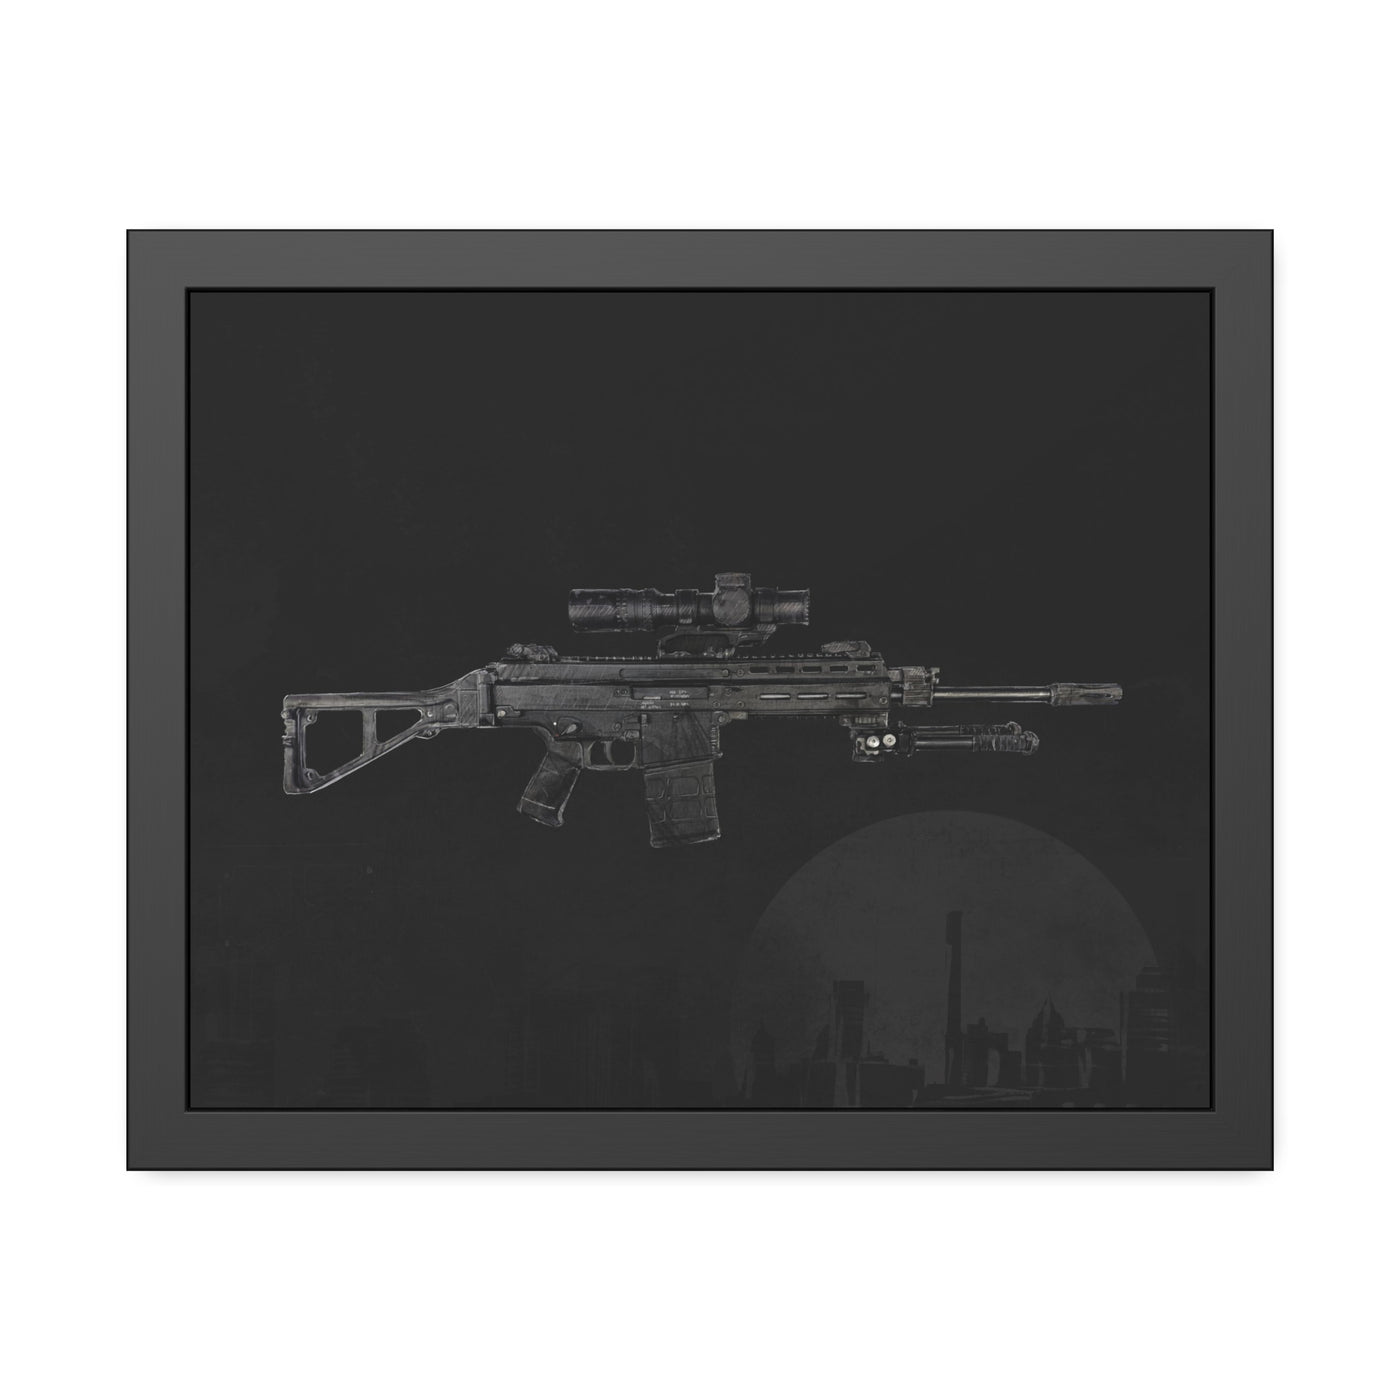 The Urban Sniper Painting - Black Background - Black Frame - Value Collection